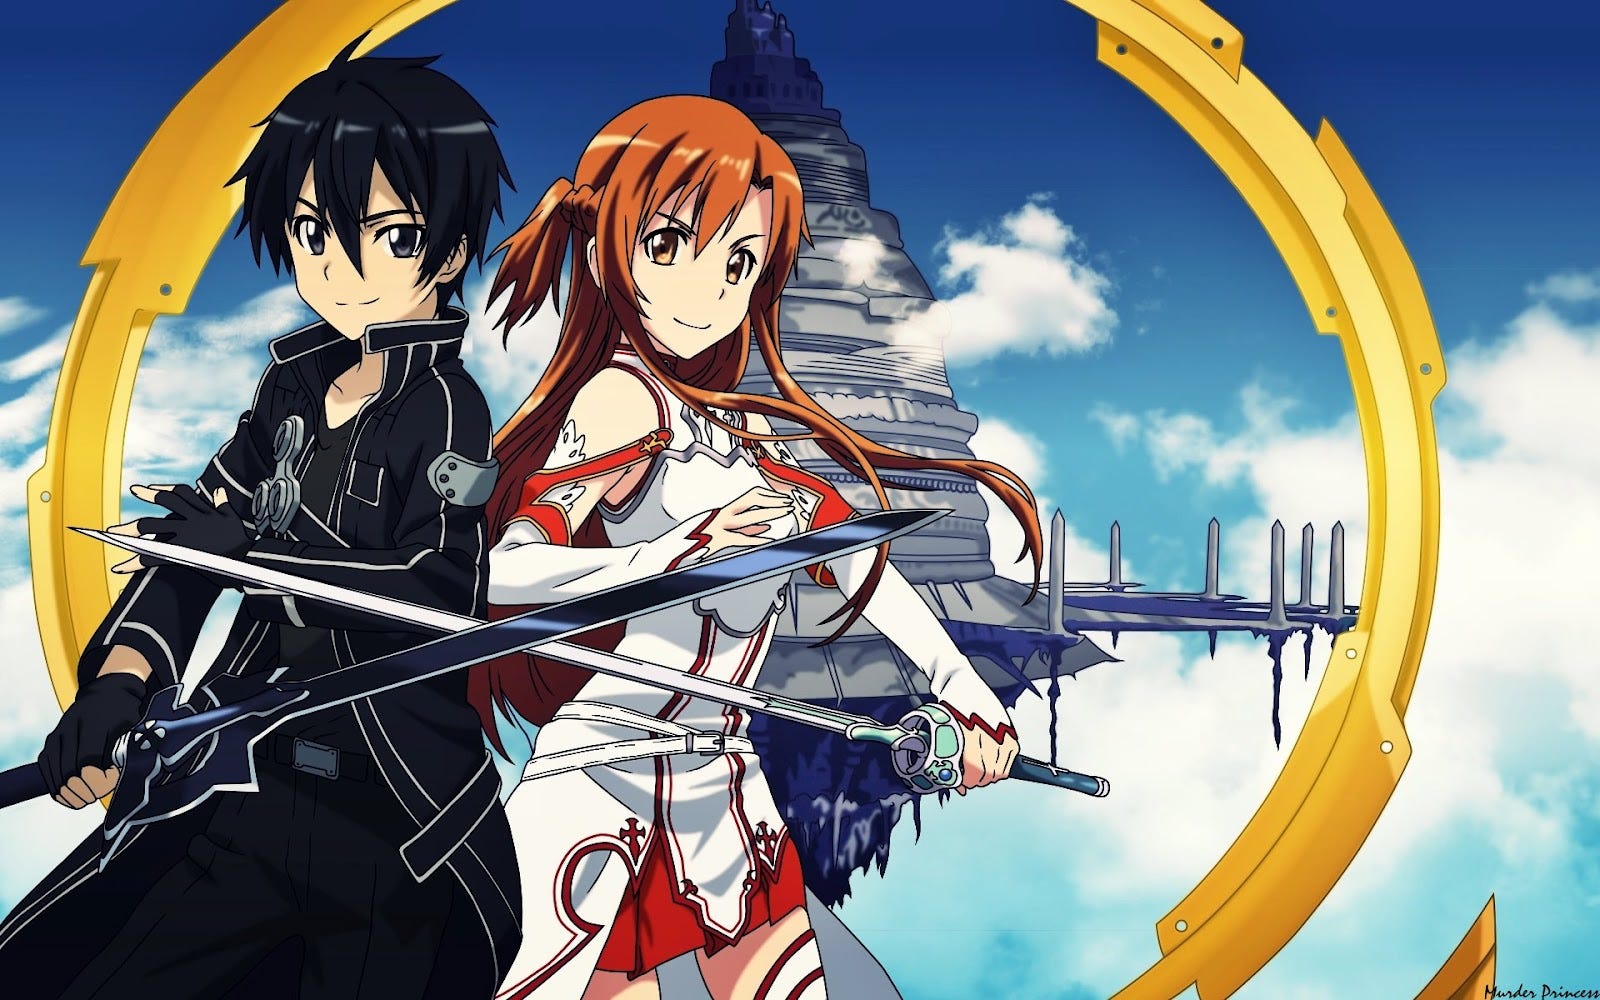 Why Sword Art Online Is So Hated